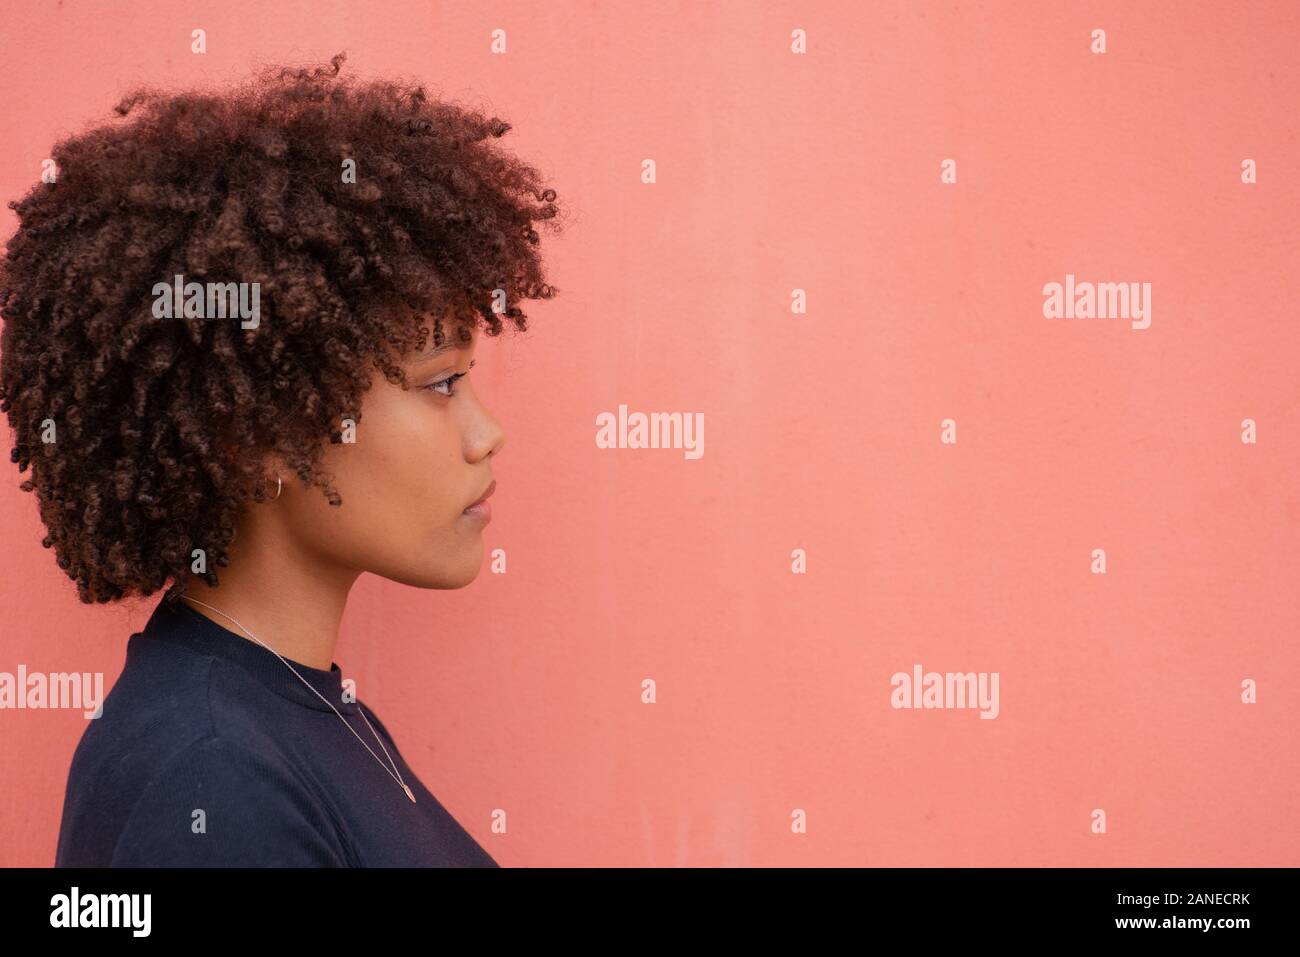 Young woman with curly hair looking sideways against colorful background Stock Photo